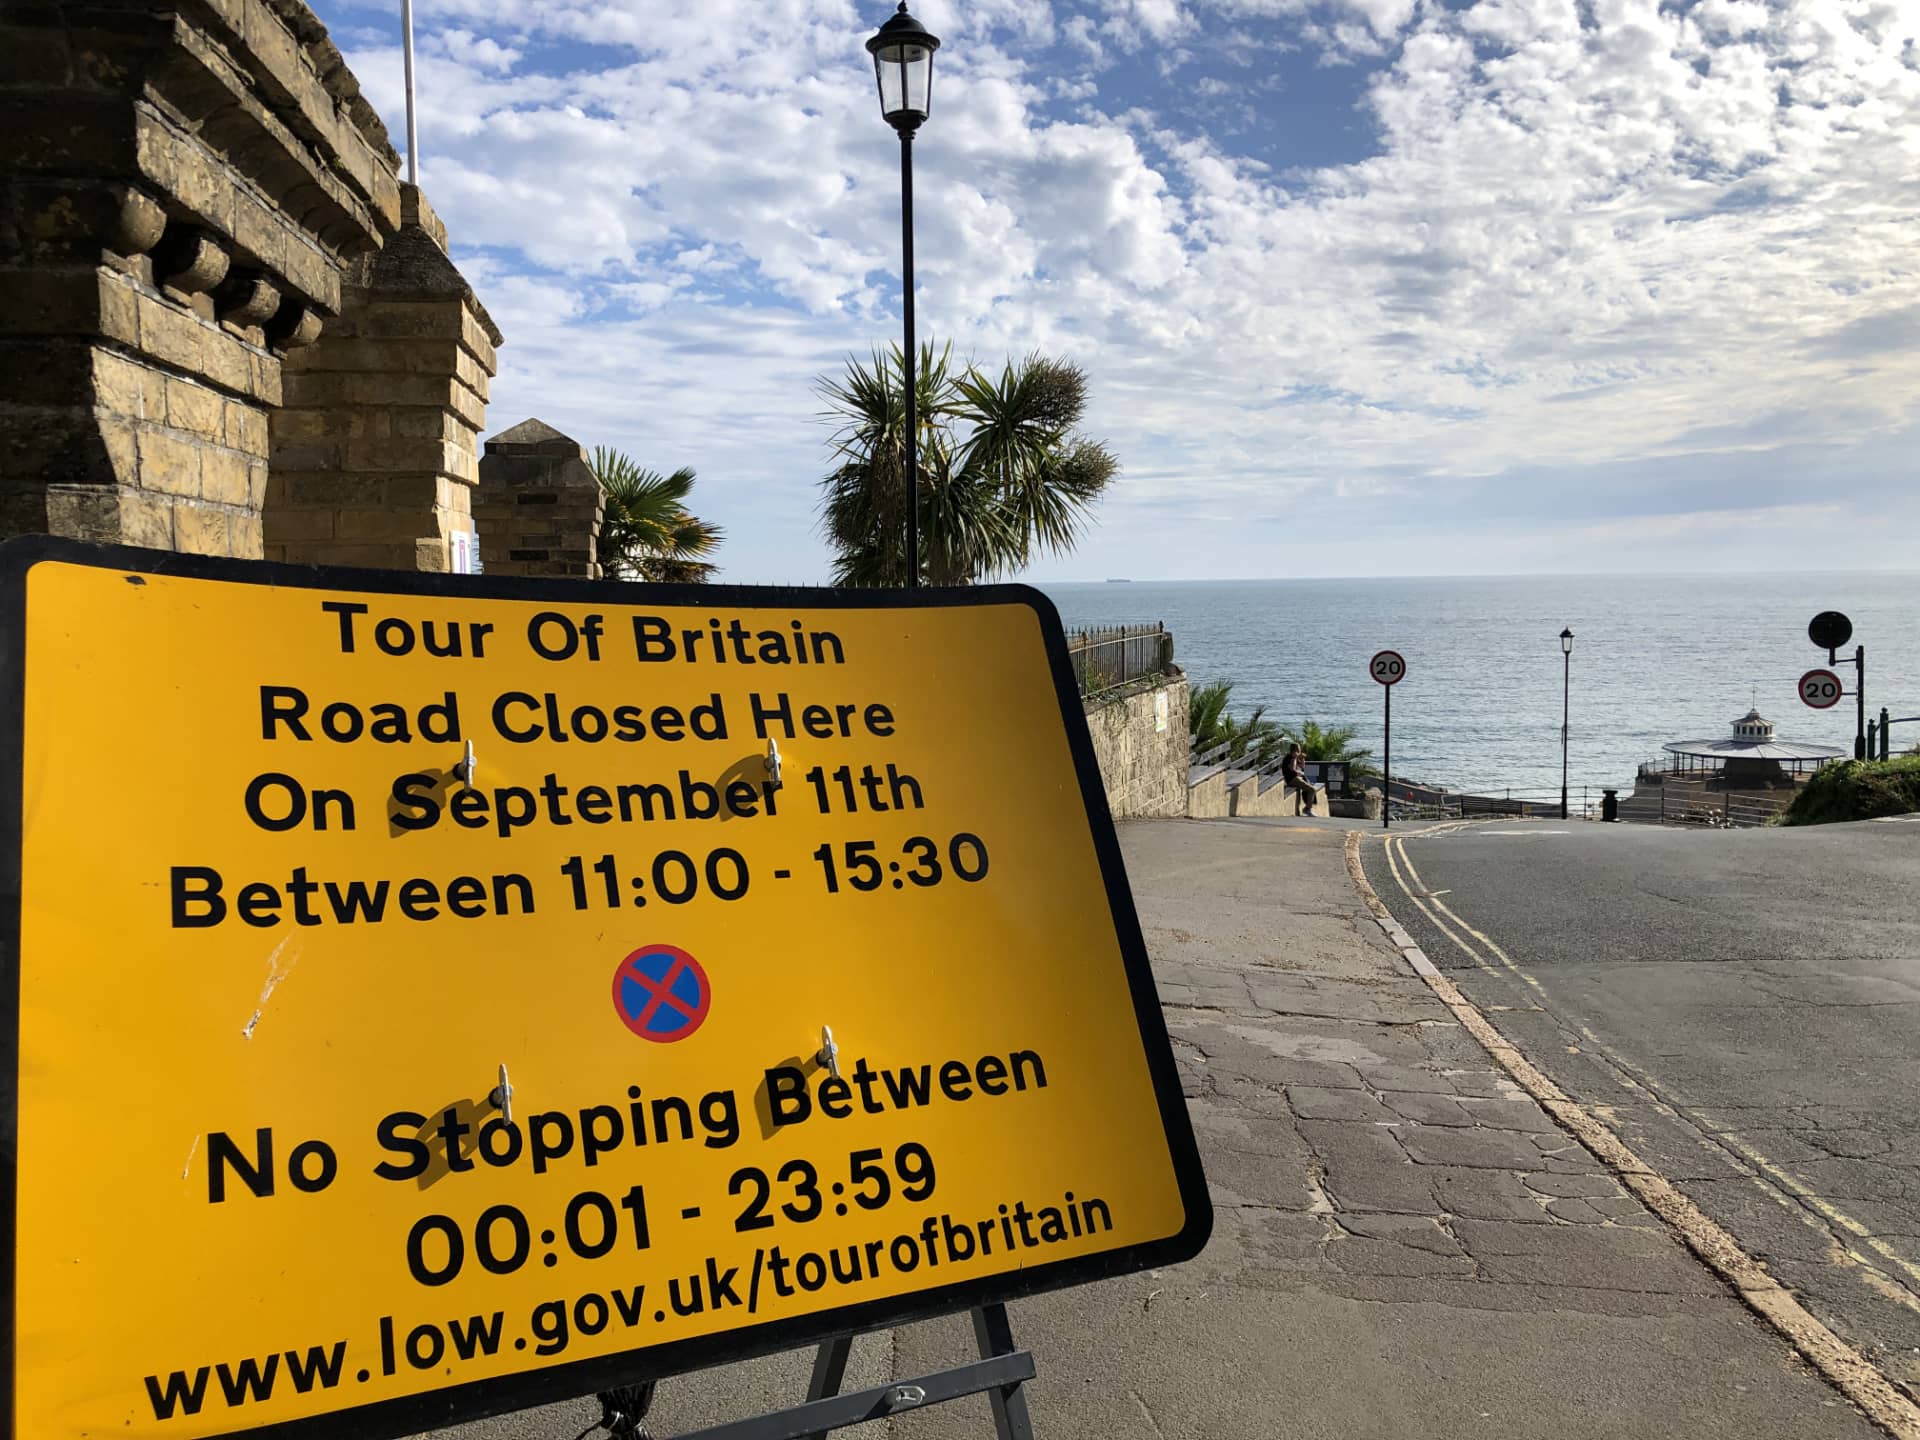 Cascade road closure sign for Tour of Britain